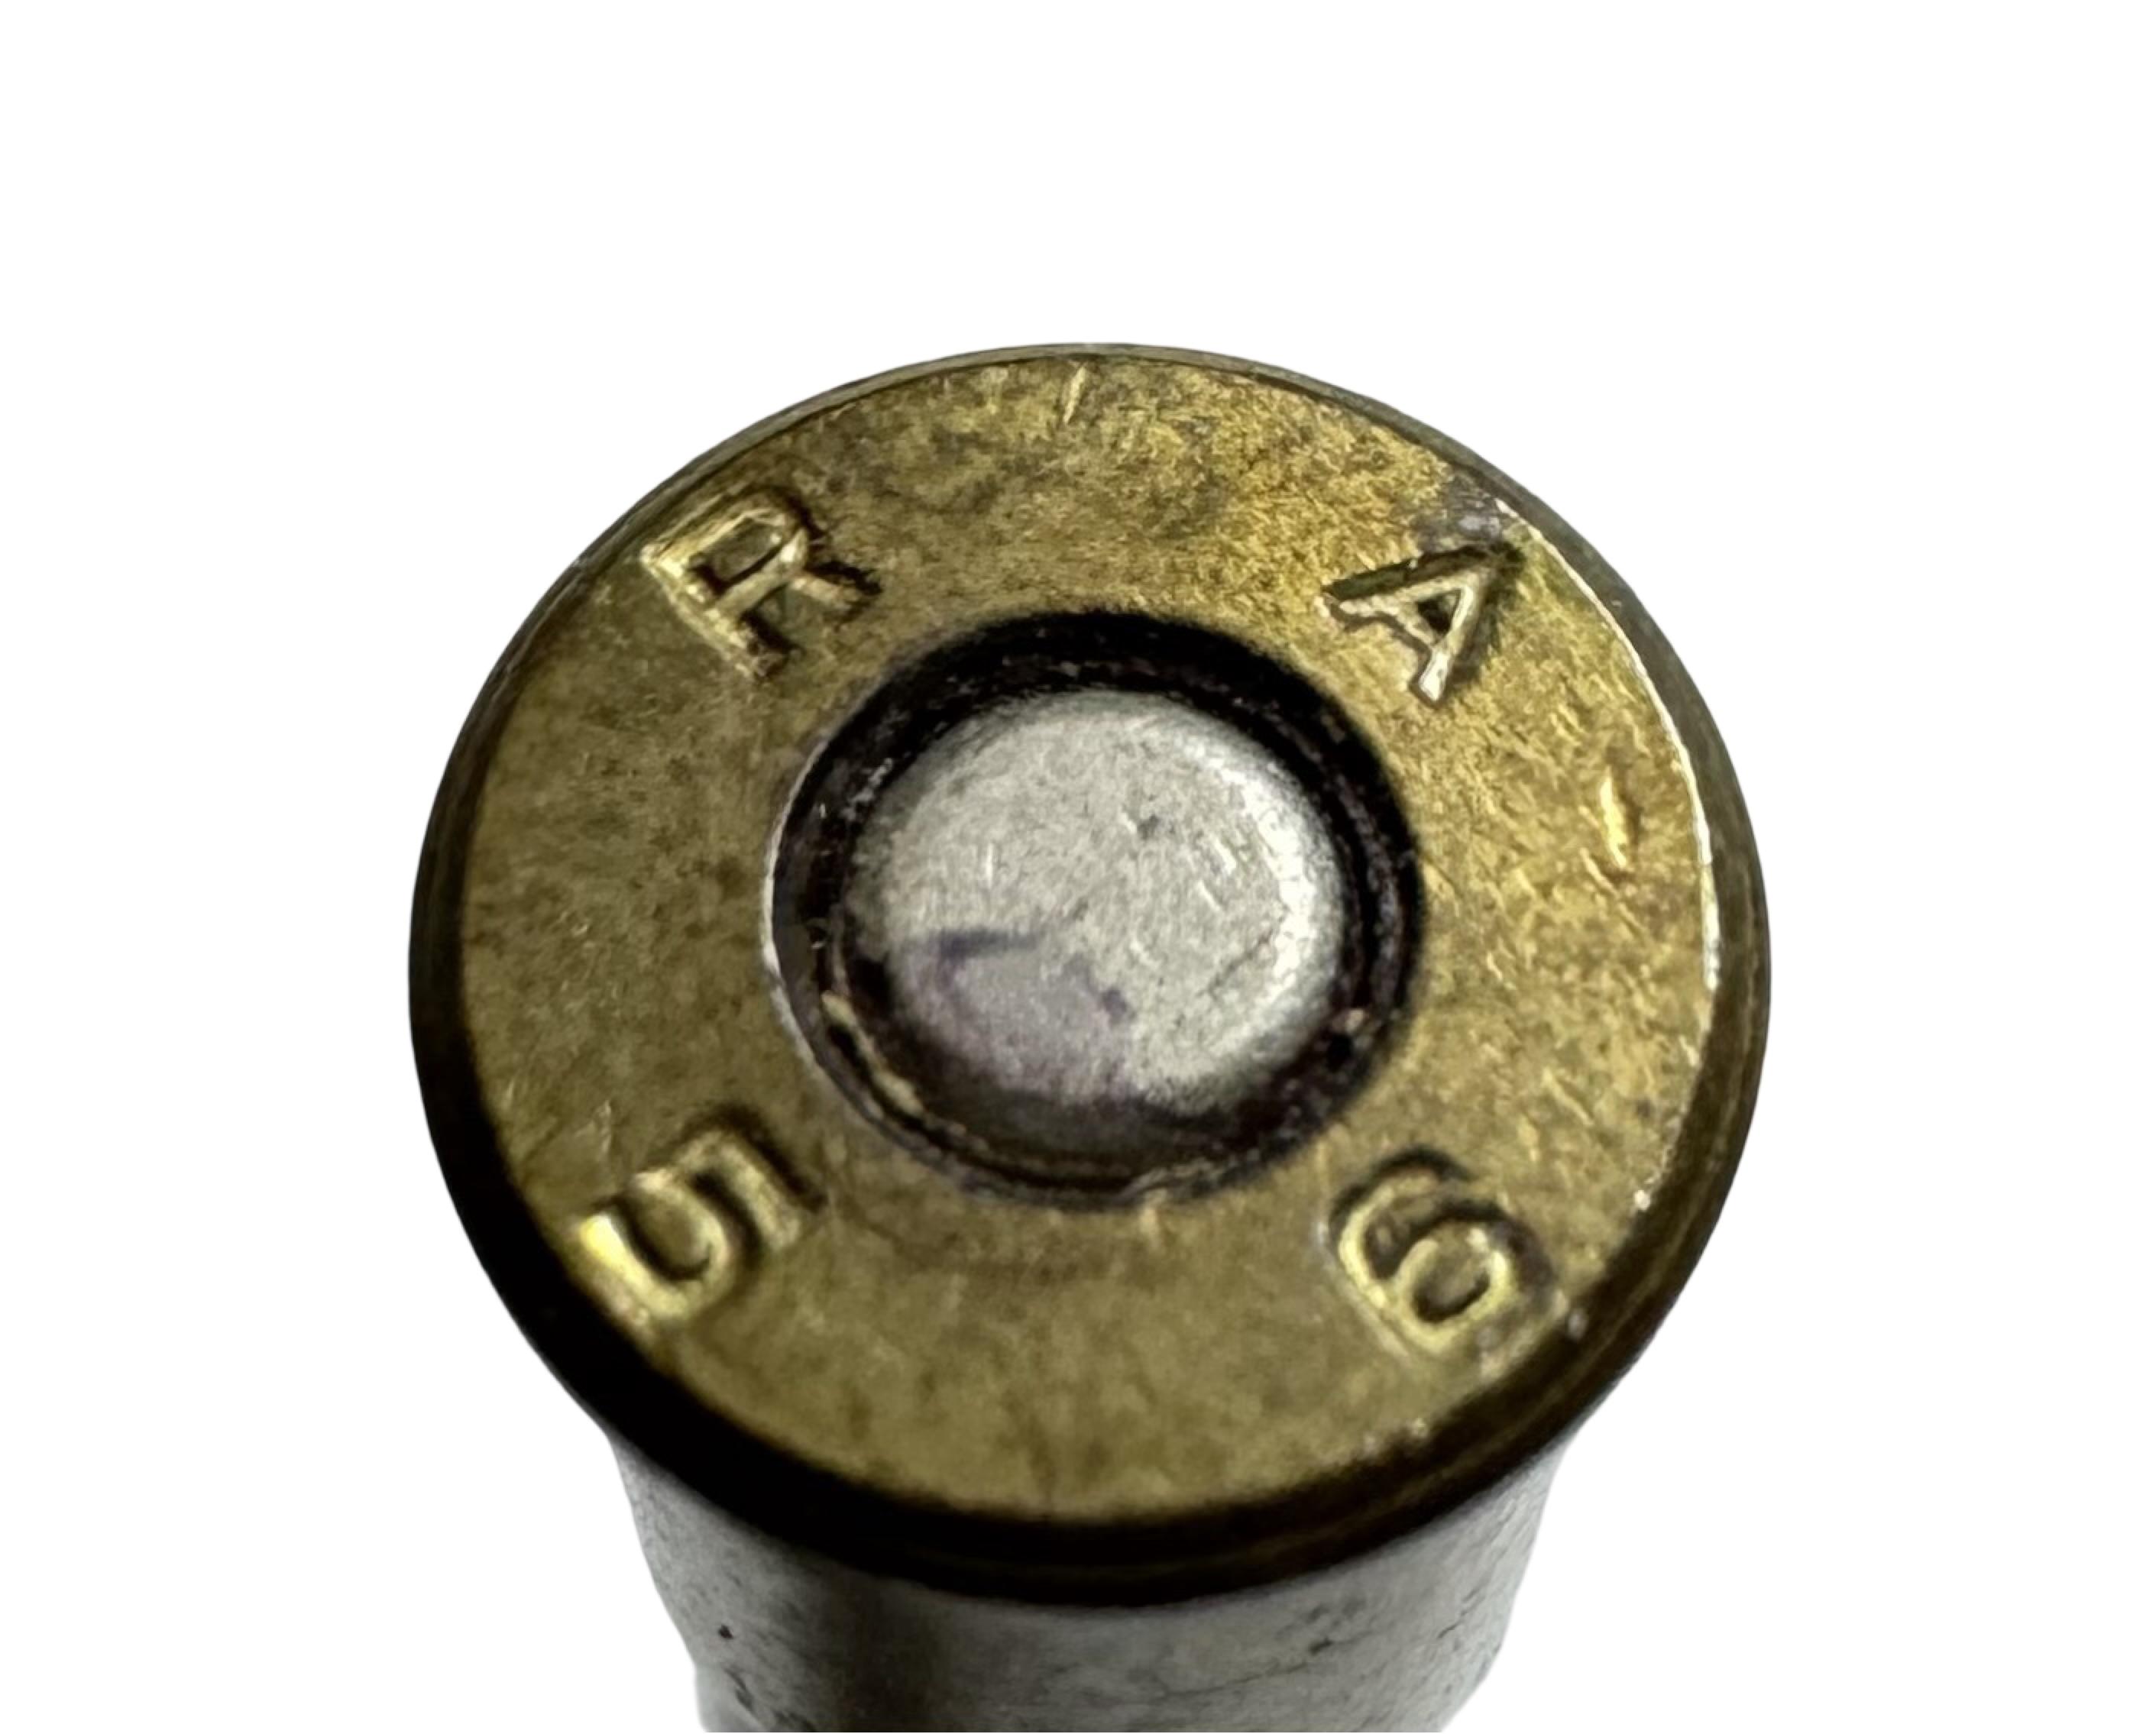 .38 SPECIAL BALL Cartridge